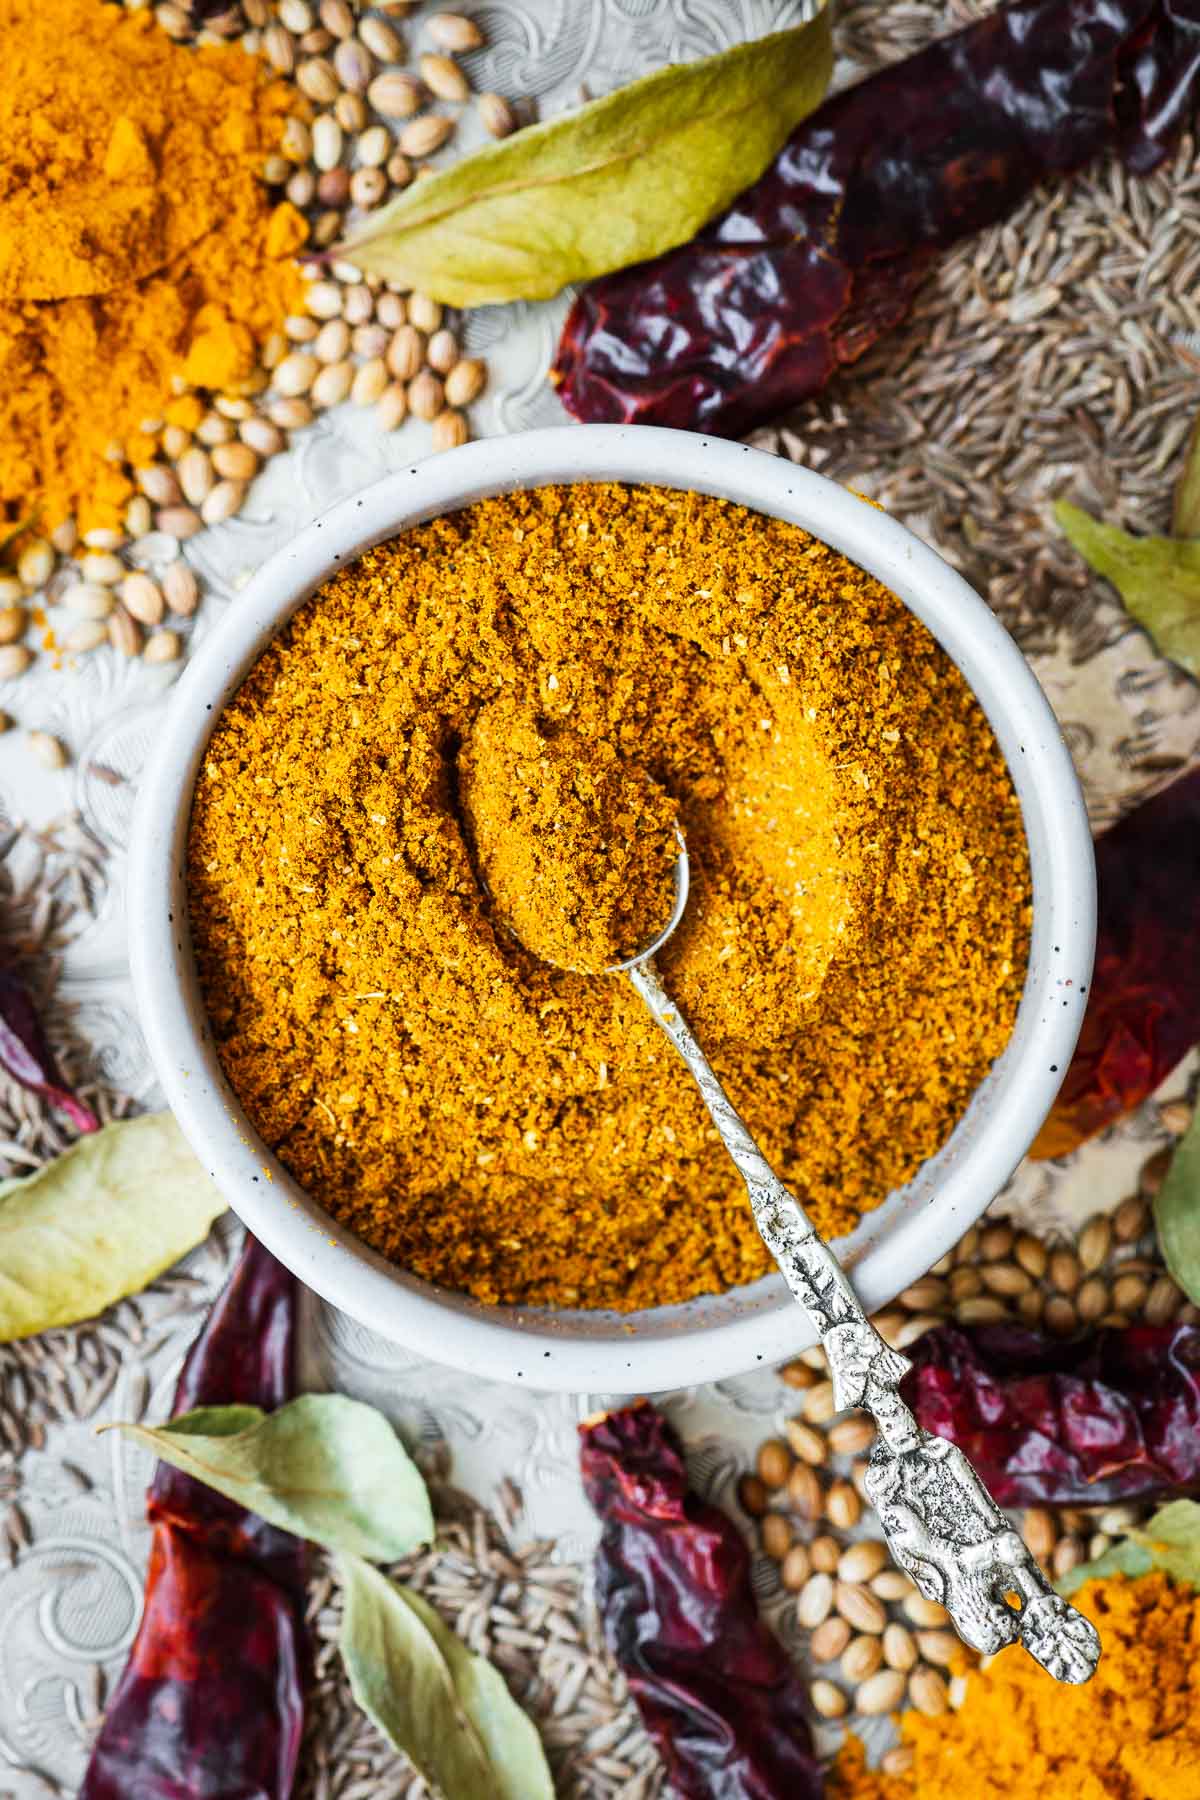 Homemade curry powder in a small bowl with a serving spoon surrounded by ingredients such as turmeric, coriander, cumin, chillies, black pepper and dried curry leaf.